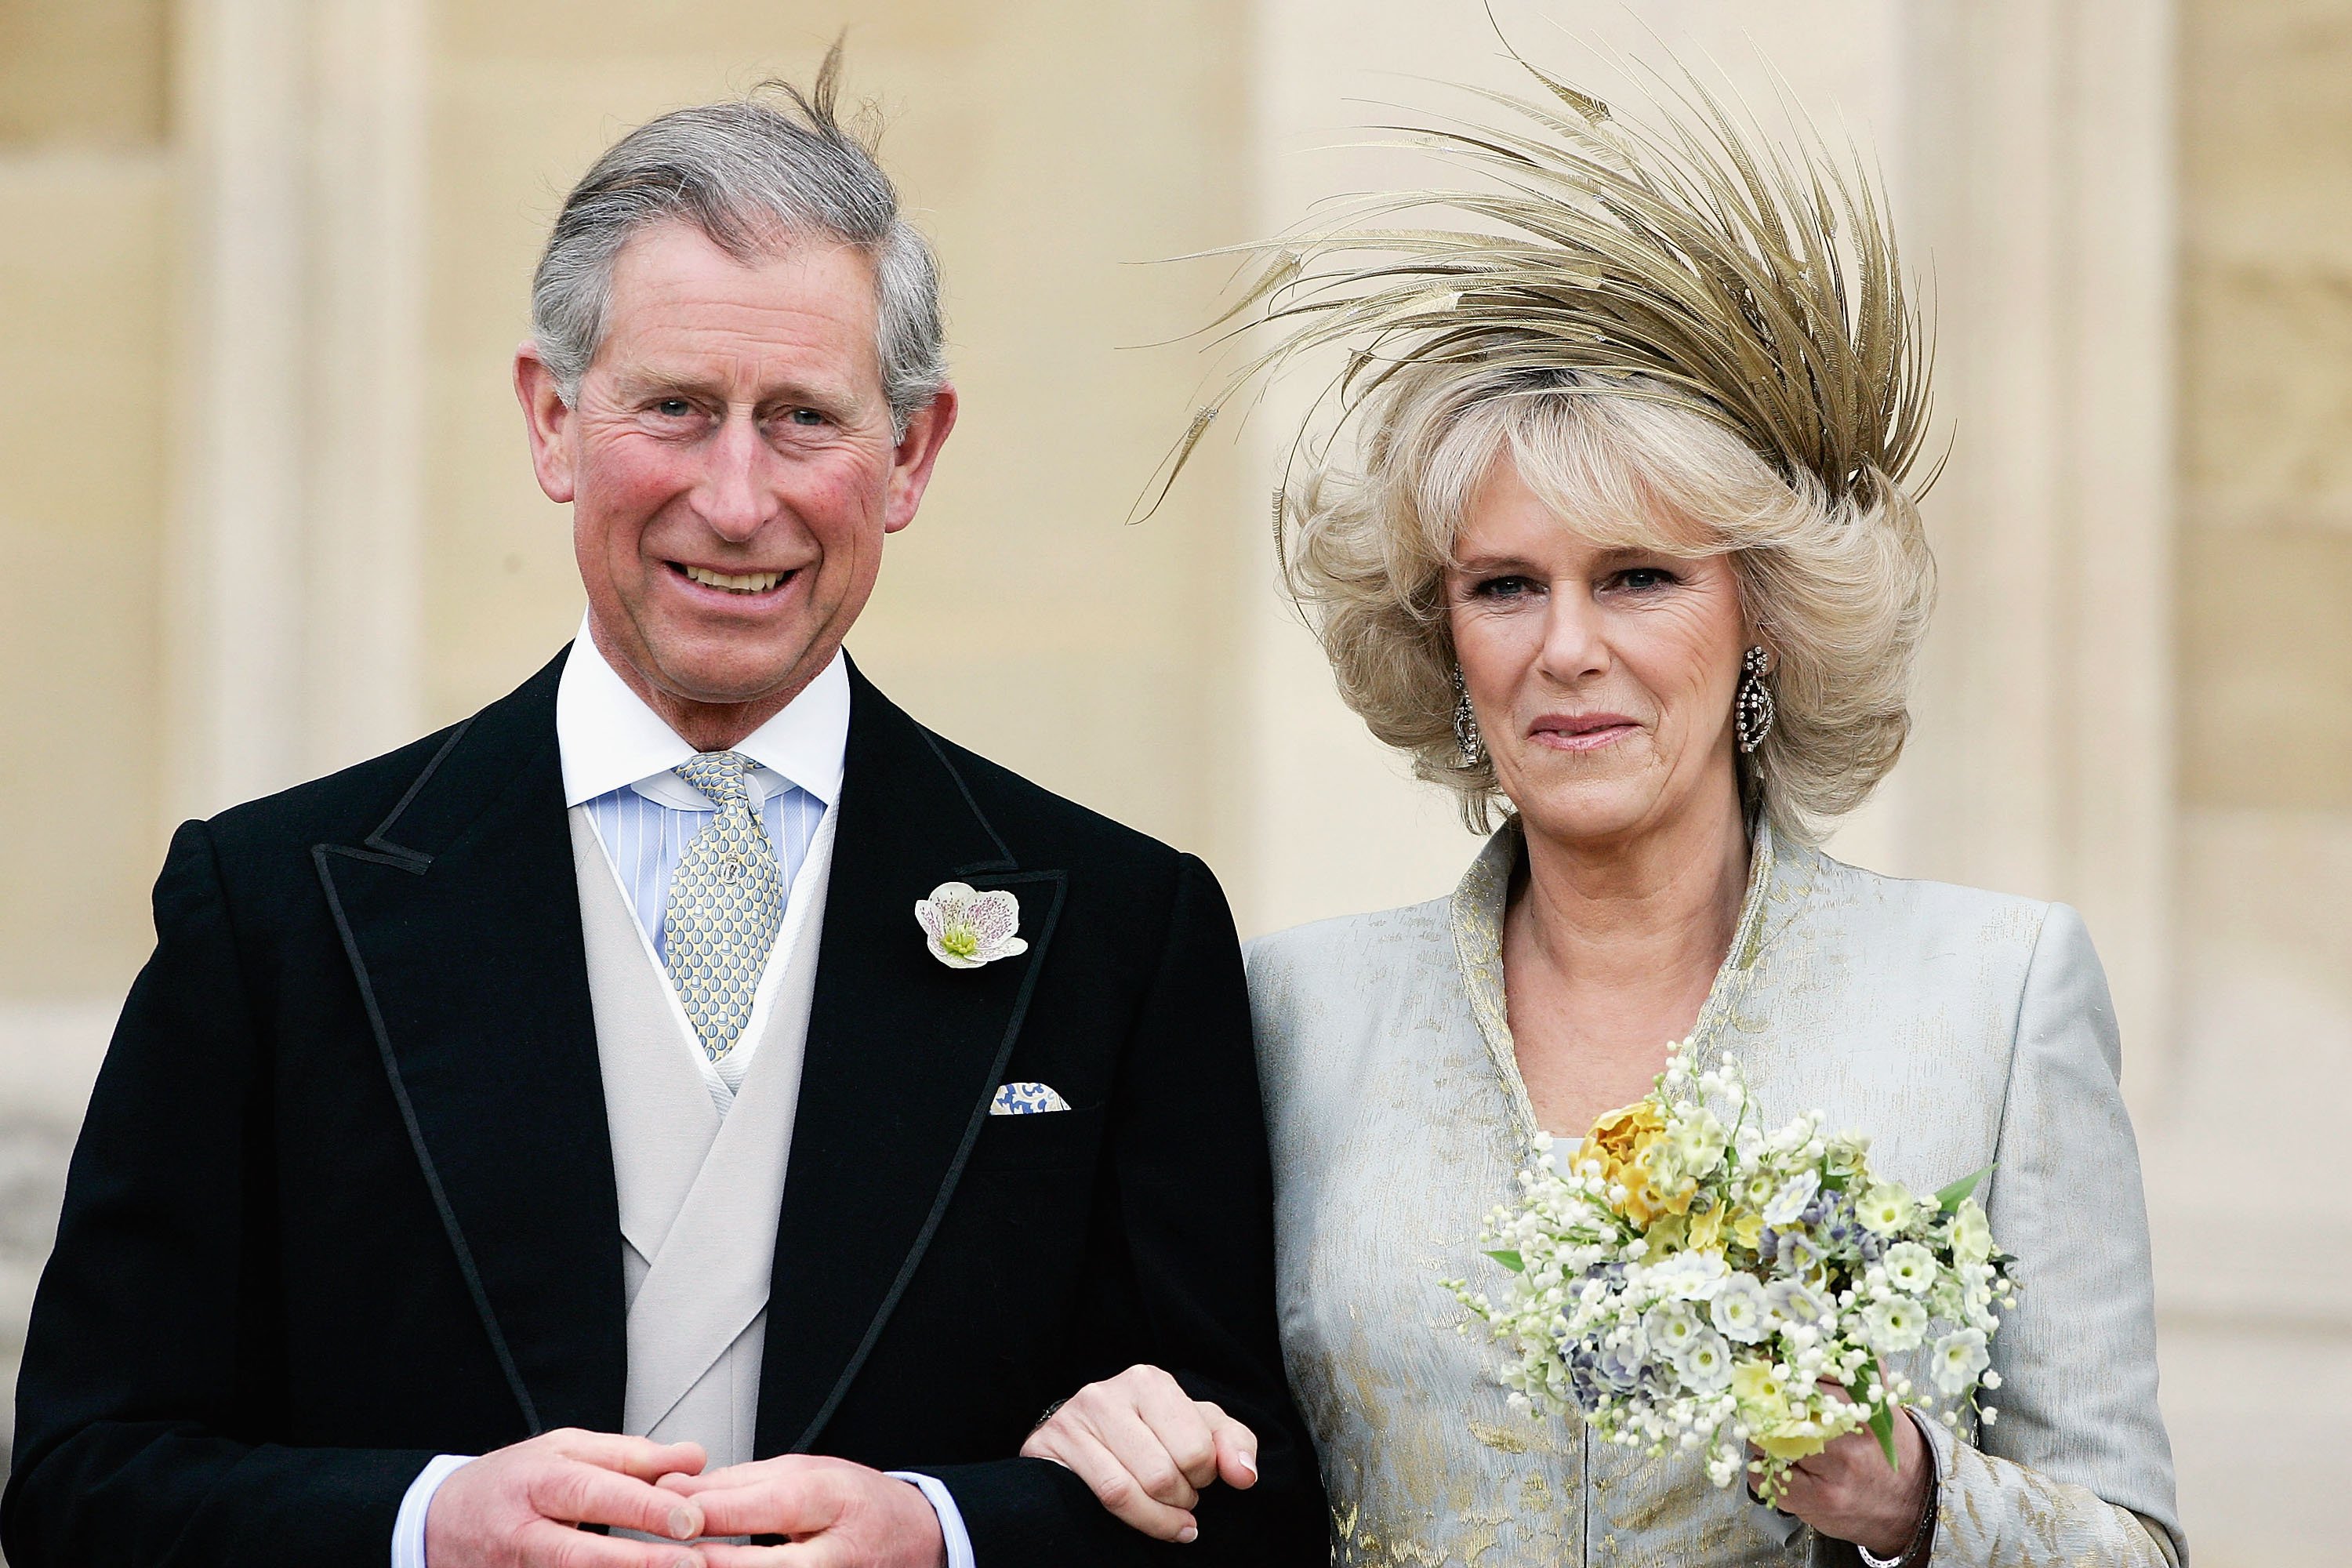 HRH the Prince of Wales, Prince Charles, and The Duchess of Cornwall, Camilla Parker Bowles in silk dress leaves the Service of Prayer and Dedication blessing their marriage at Windsor Castle on April 9, 2005 in Berkshire, England. | Source: Getty Images